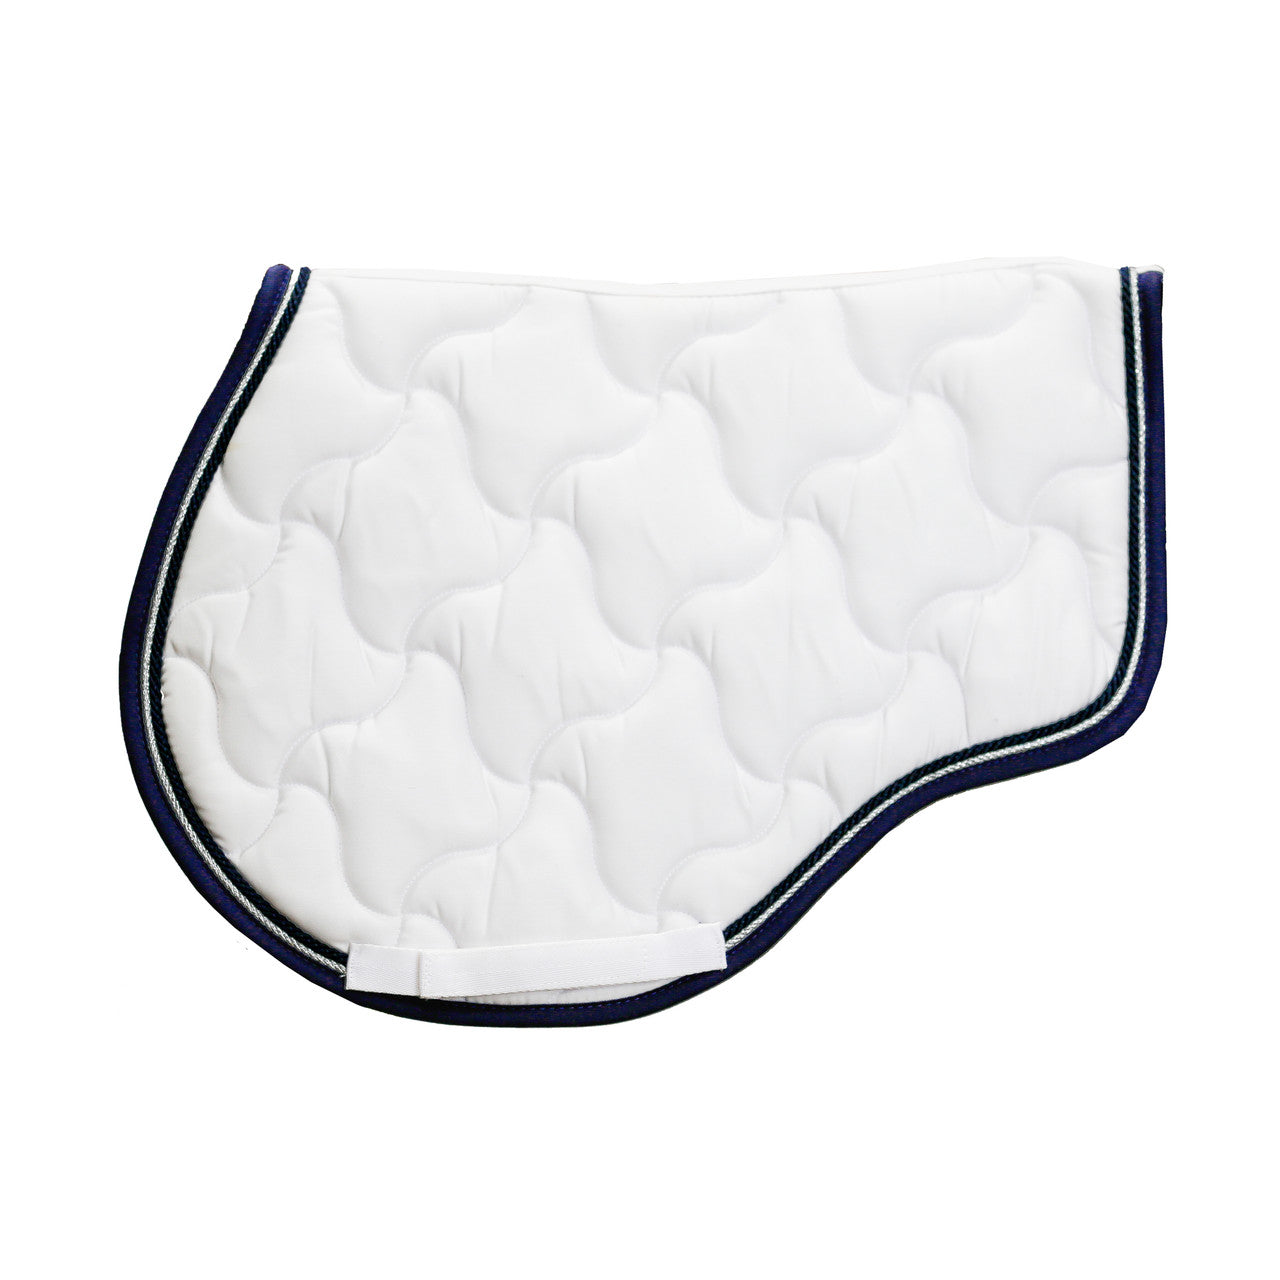 Competition White AP Saddle Pad - Navy Binding - LOW STOCK...LAST FEW LEFT!